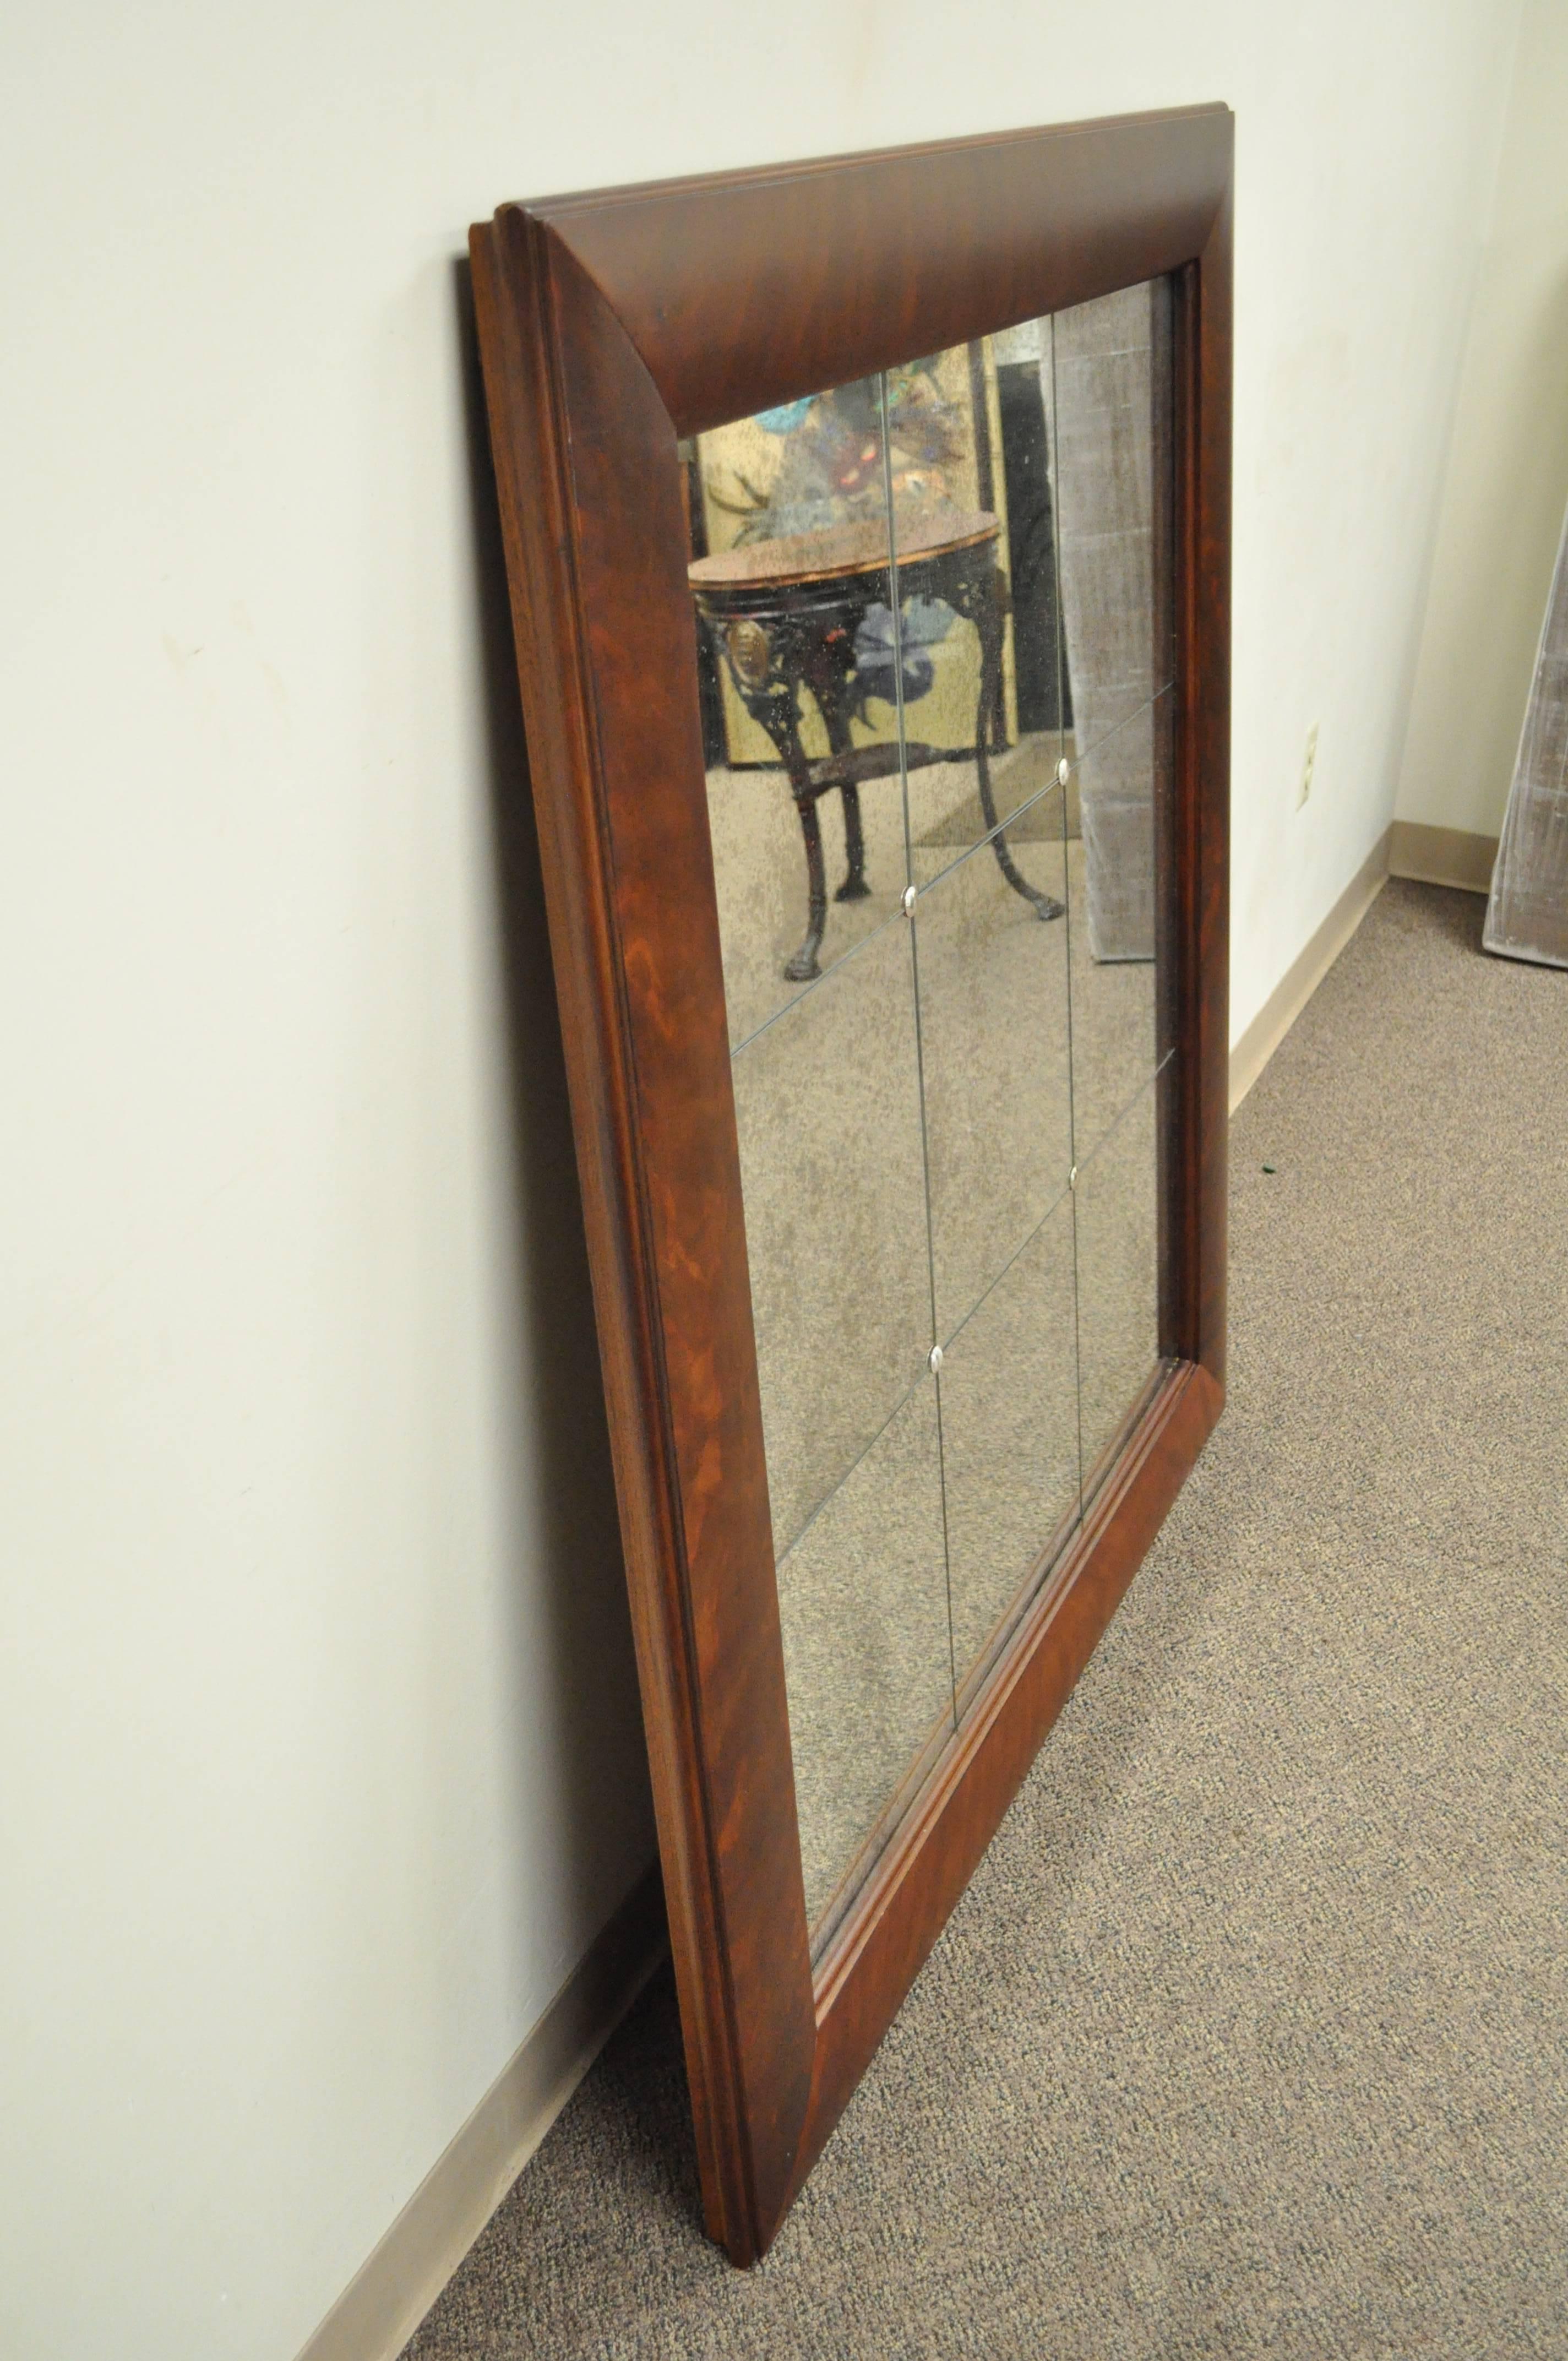 Polo Ralph Lauren home crotch mahogany antiqued glass Venetian style mirror. Original owner said retail was over $6,000. (Serial # 39209 03937). Item features solid mahogany wood frame with beautiful wood grain and rounded edges, 